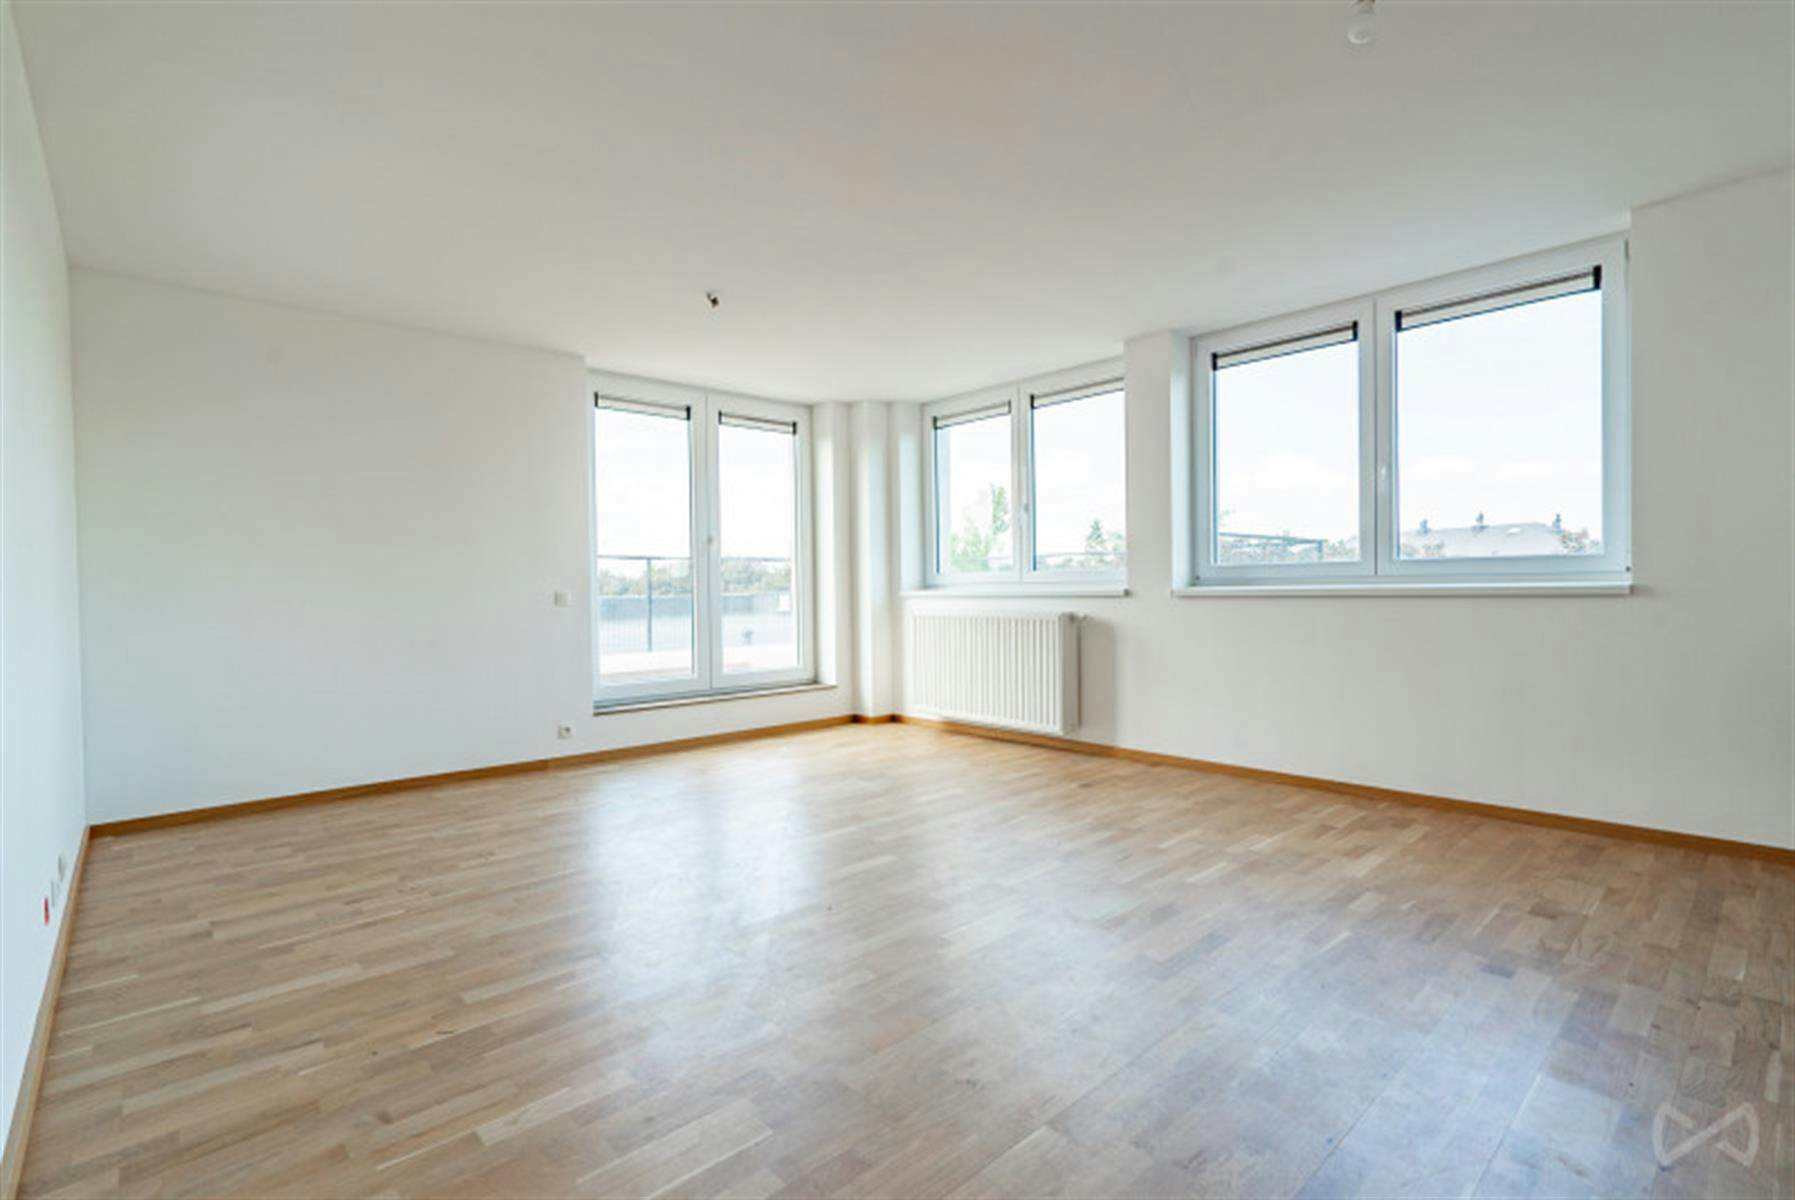 Picture 4 of 4 for Flat with two bedrooms in Mons